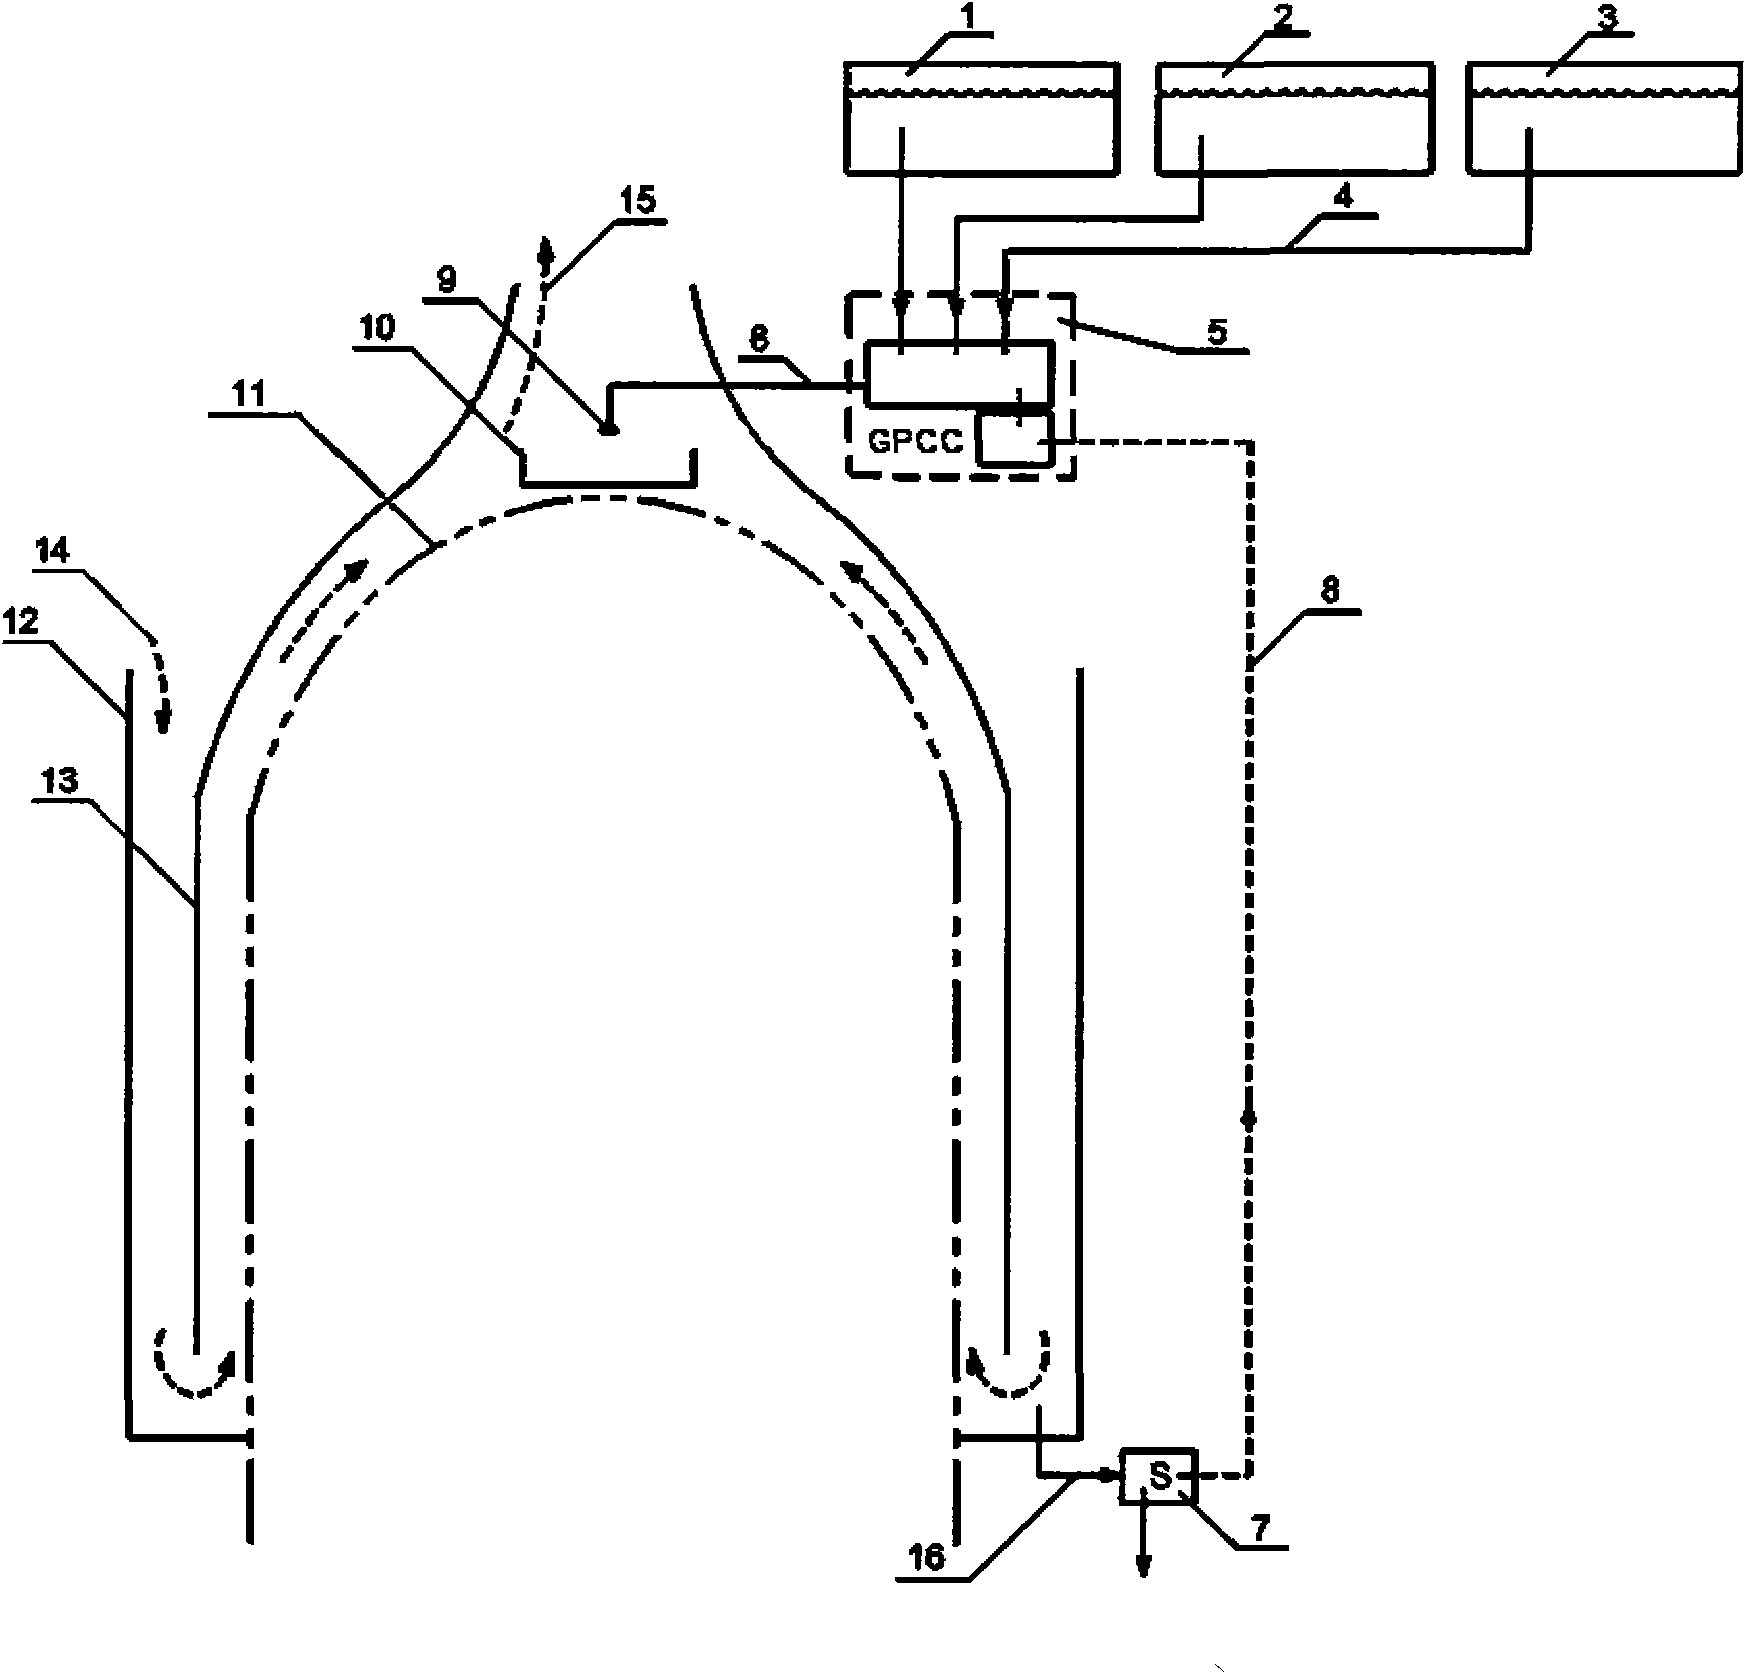 High-capacity and fully passive containment cooling system